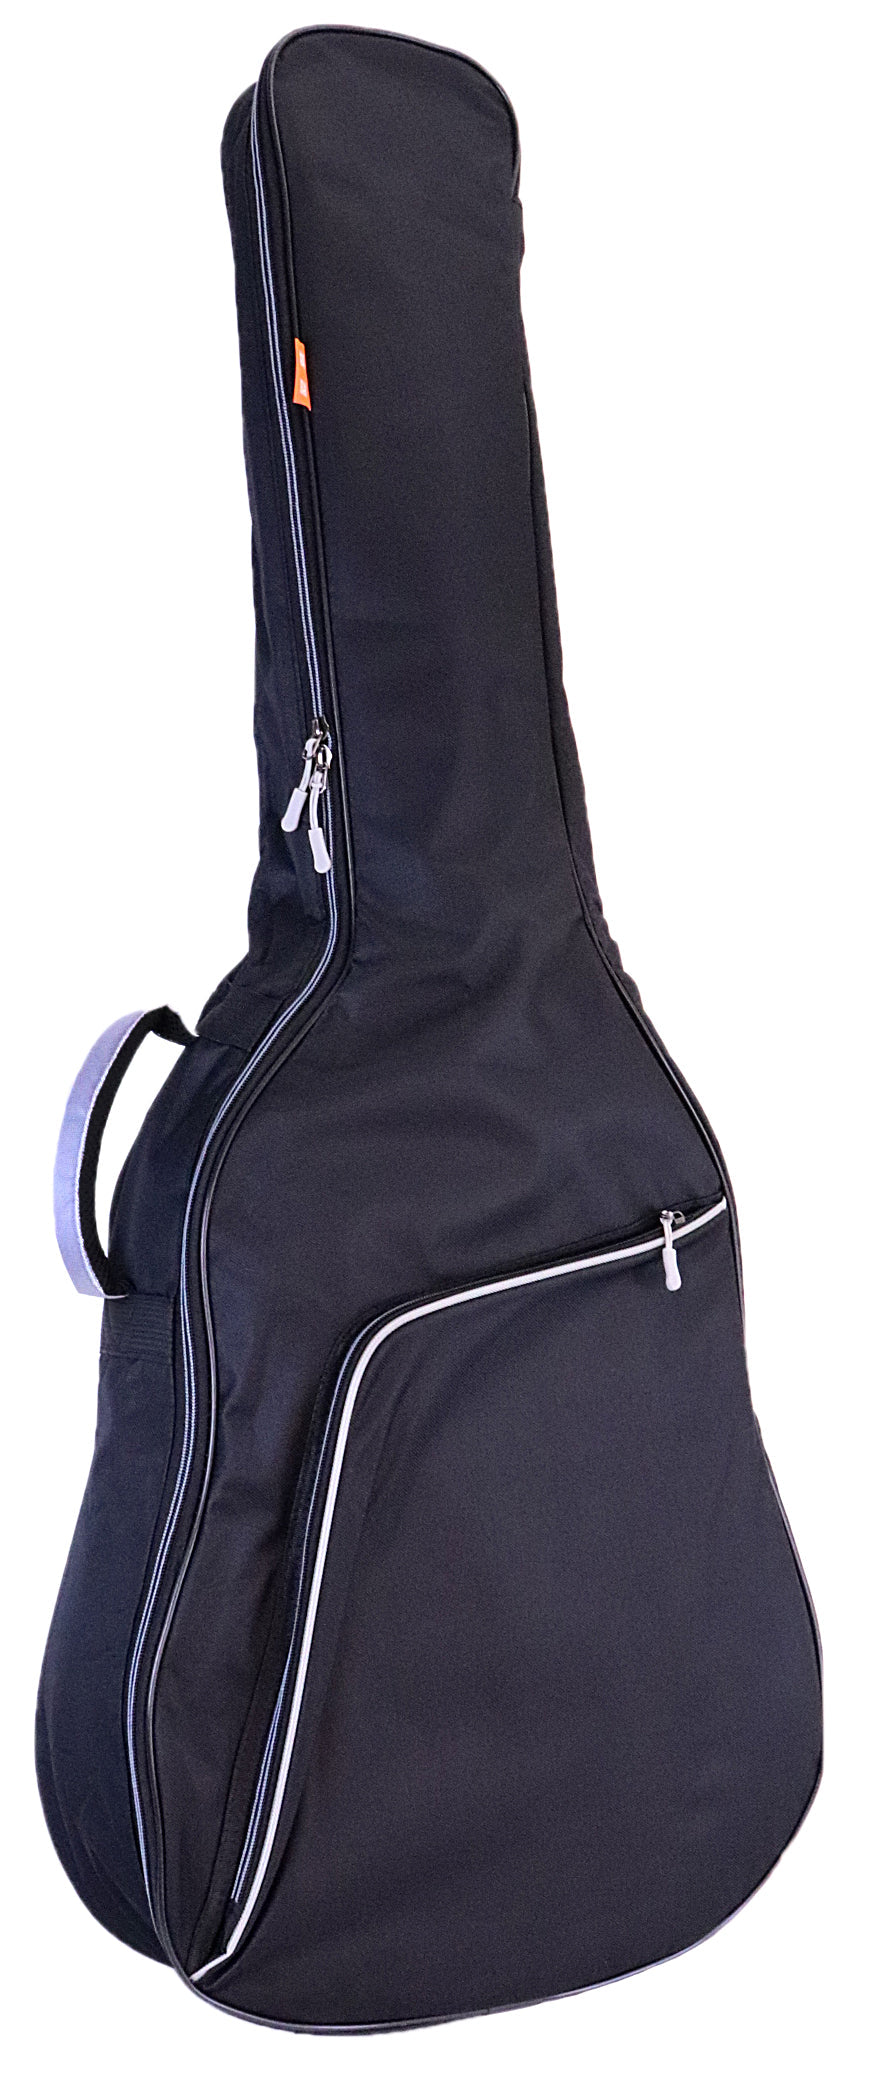 GBD-01 Acoustic Dreadnought Guitar Padded Gig Bag